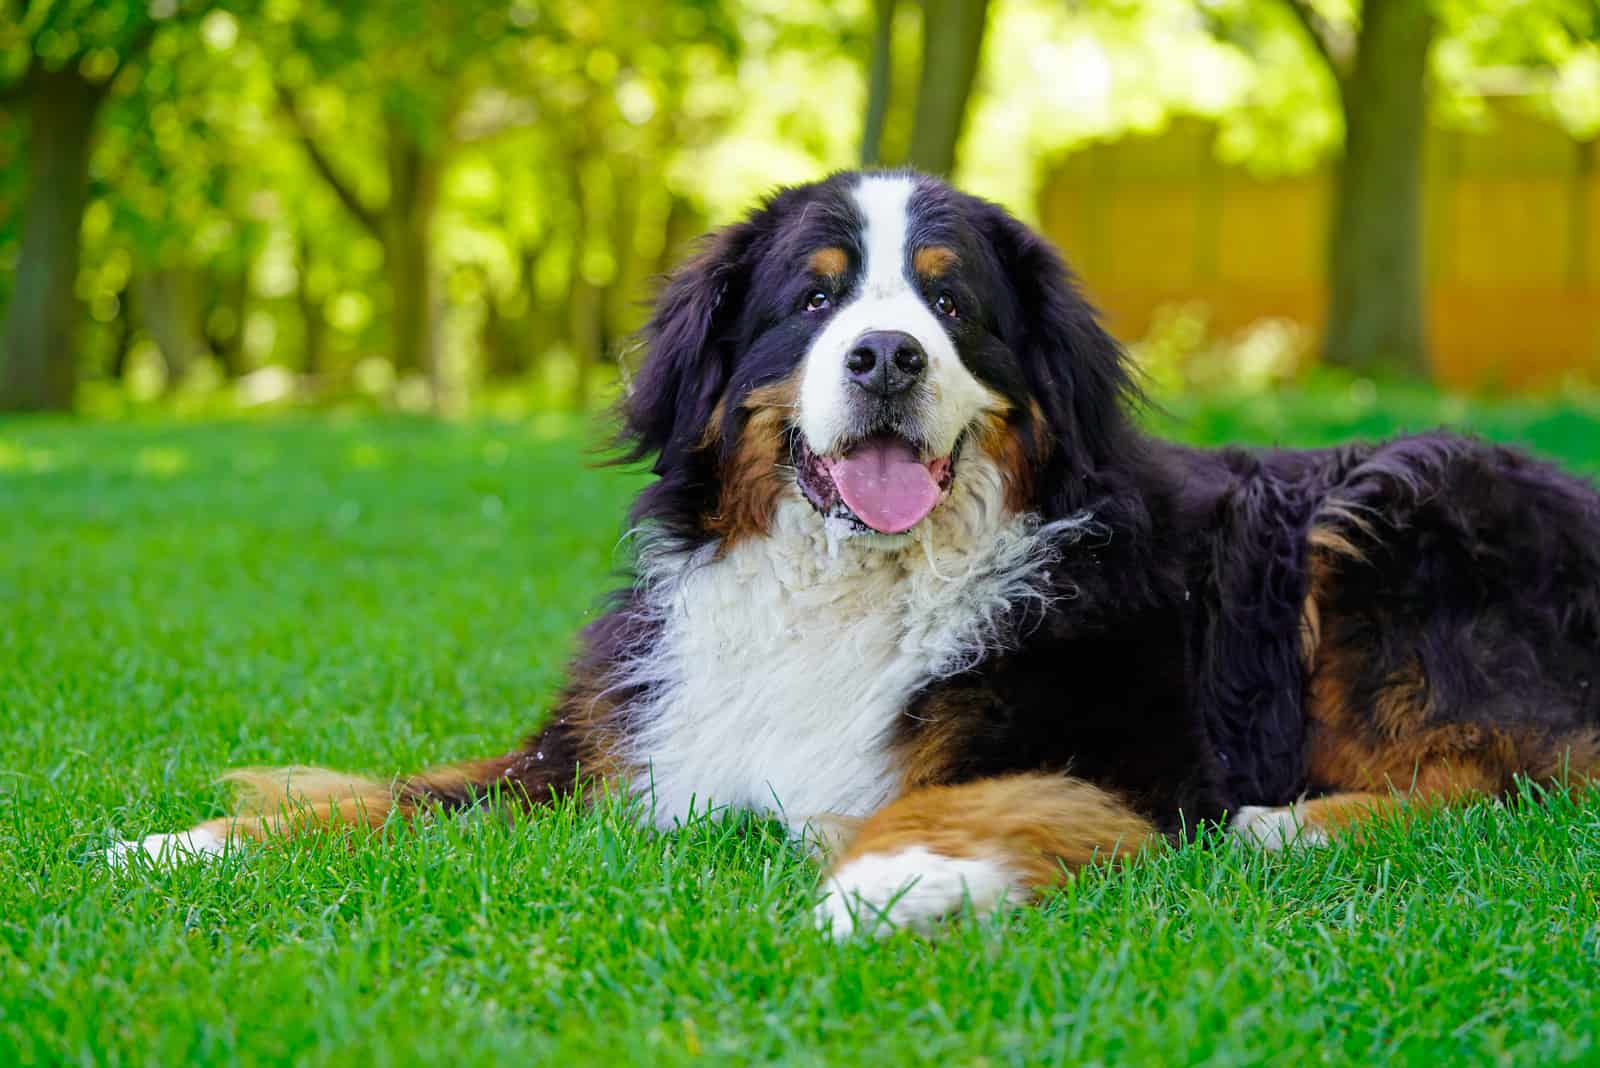 Large Bernese Mountain Dog lying on the grass in the park